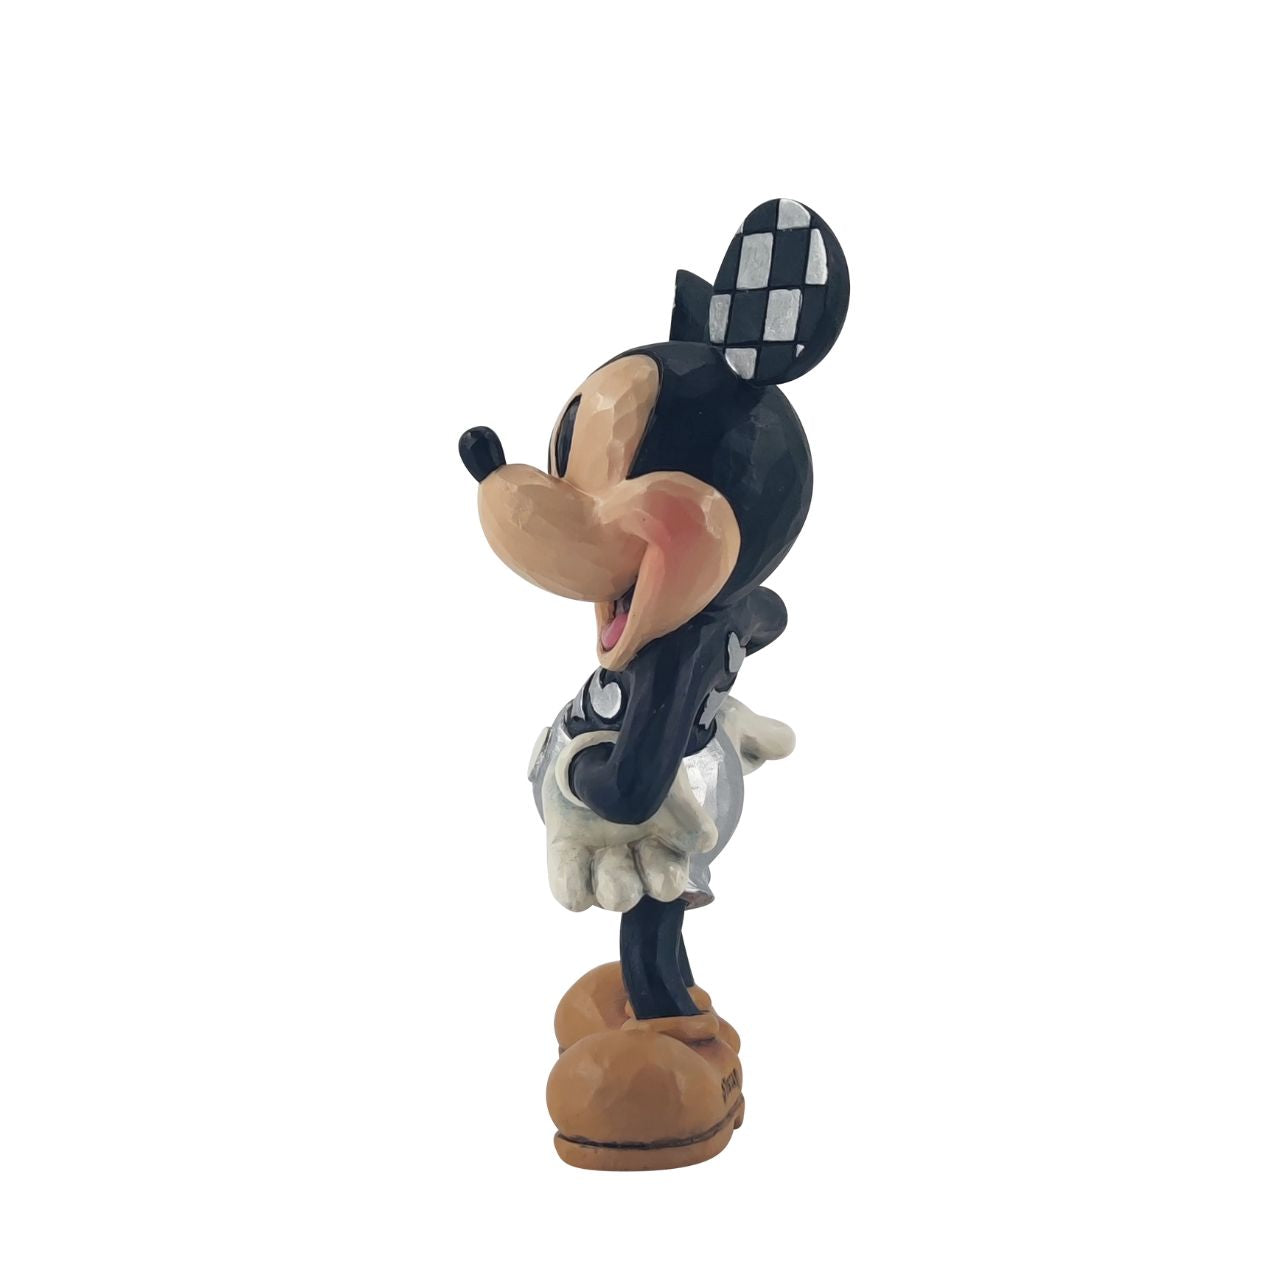 Disney 100 Years of Mickey Mouse Figurine by Jim Shore  Introducing the Disney 100 Mickey Mouse Figurine, a must-have for any Disney fan and collector. This exquisite figurine features the iconic Mickey Mouse in his classic pose, with a big grin and hands on his hips. Crafted with exceptional attention to detail, this figurine is made from high-quality cast stone, ensuring durability and longevity.